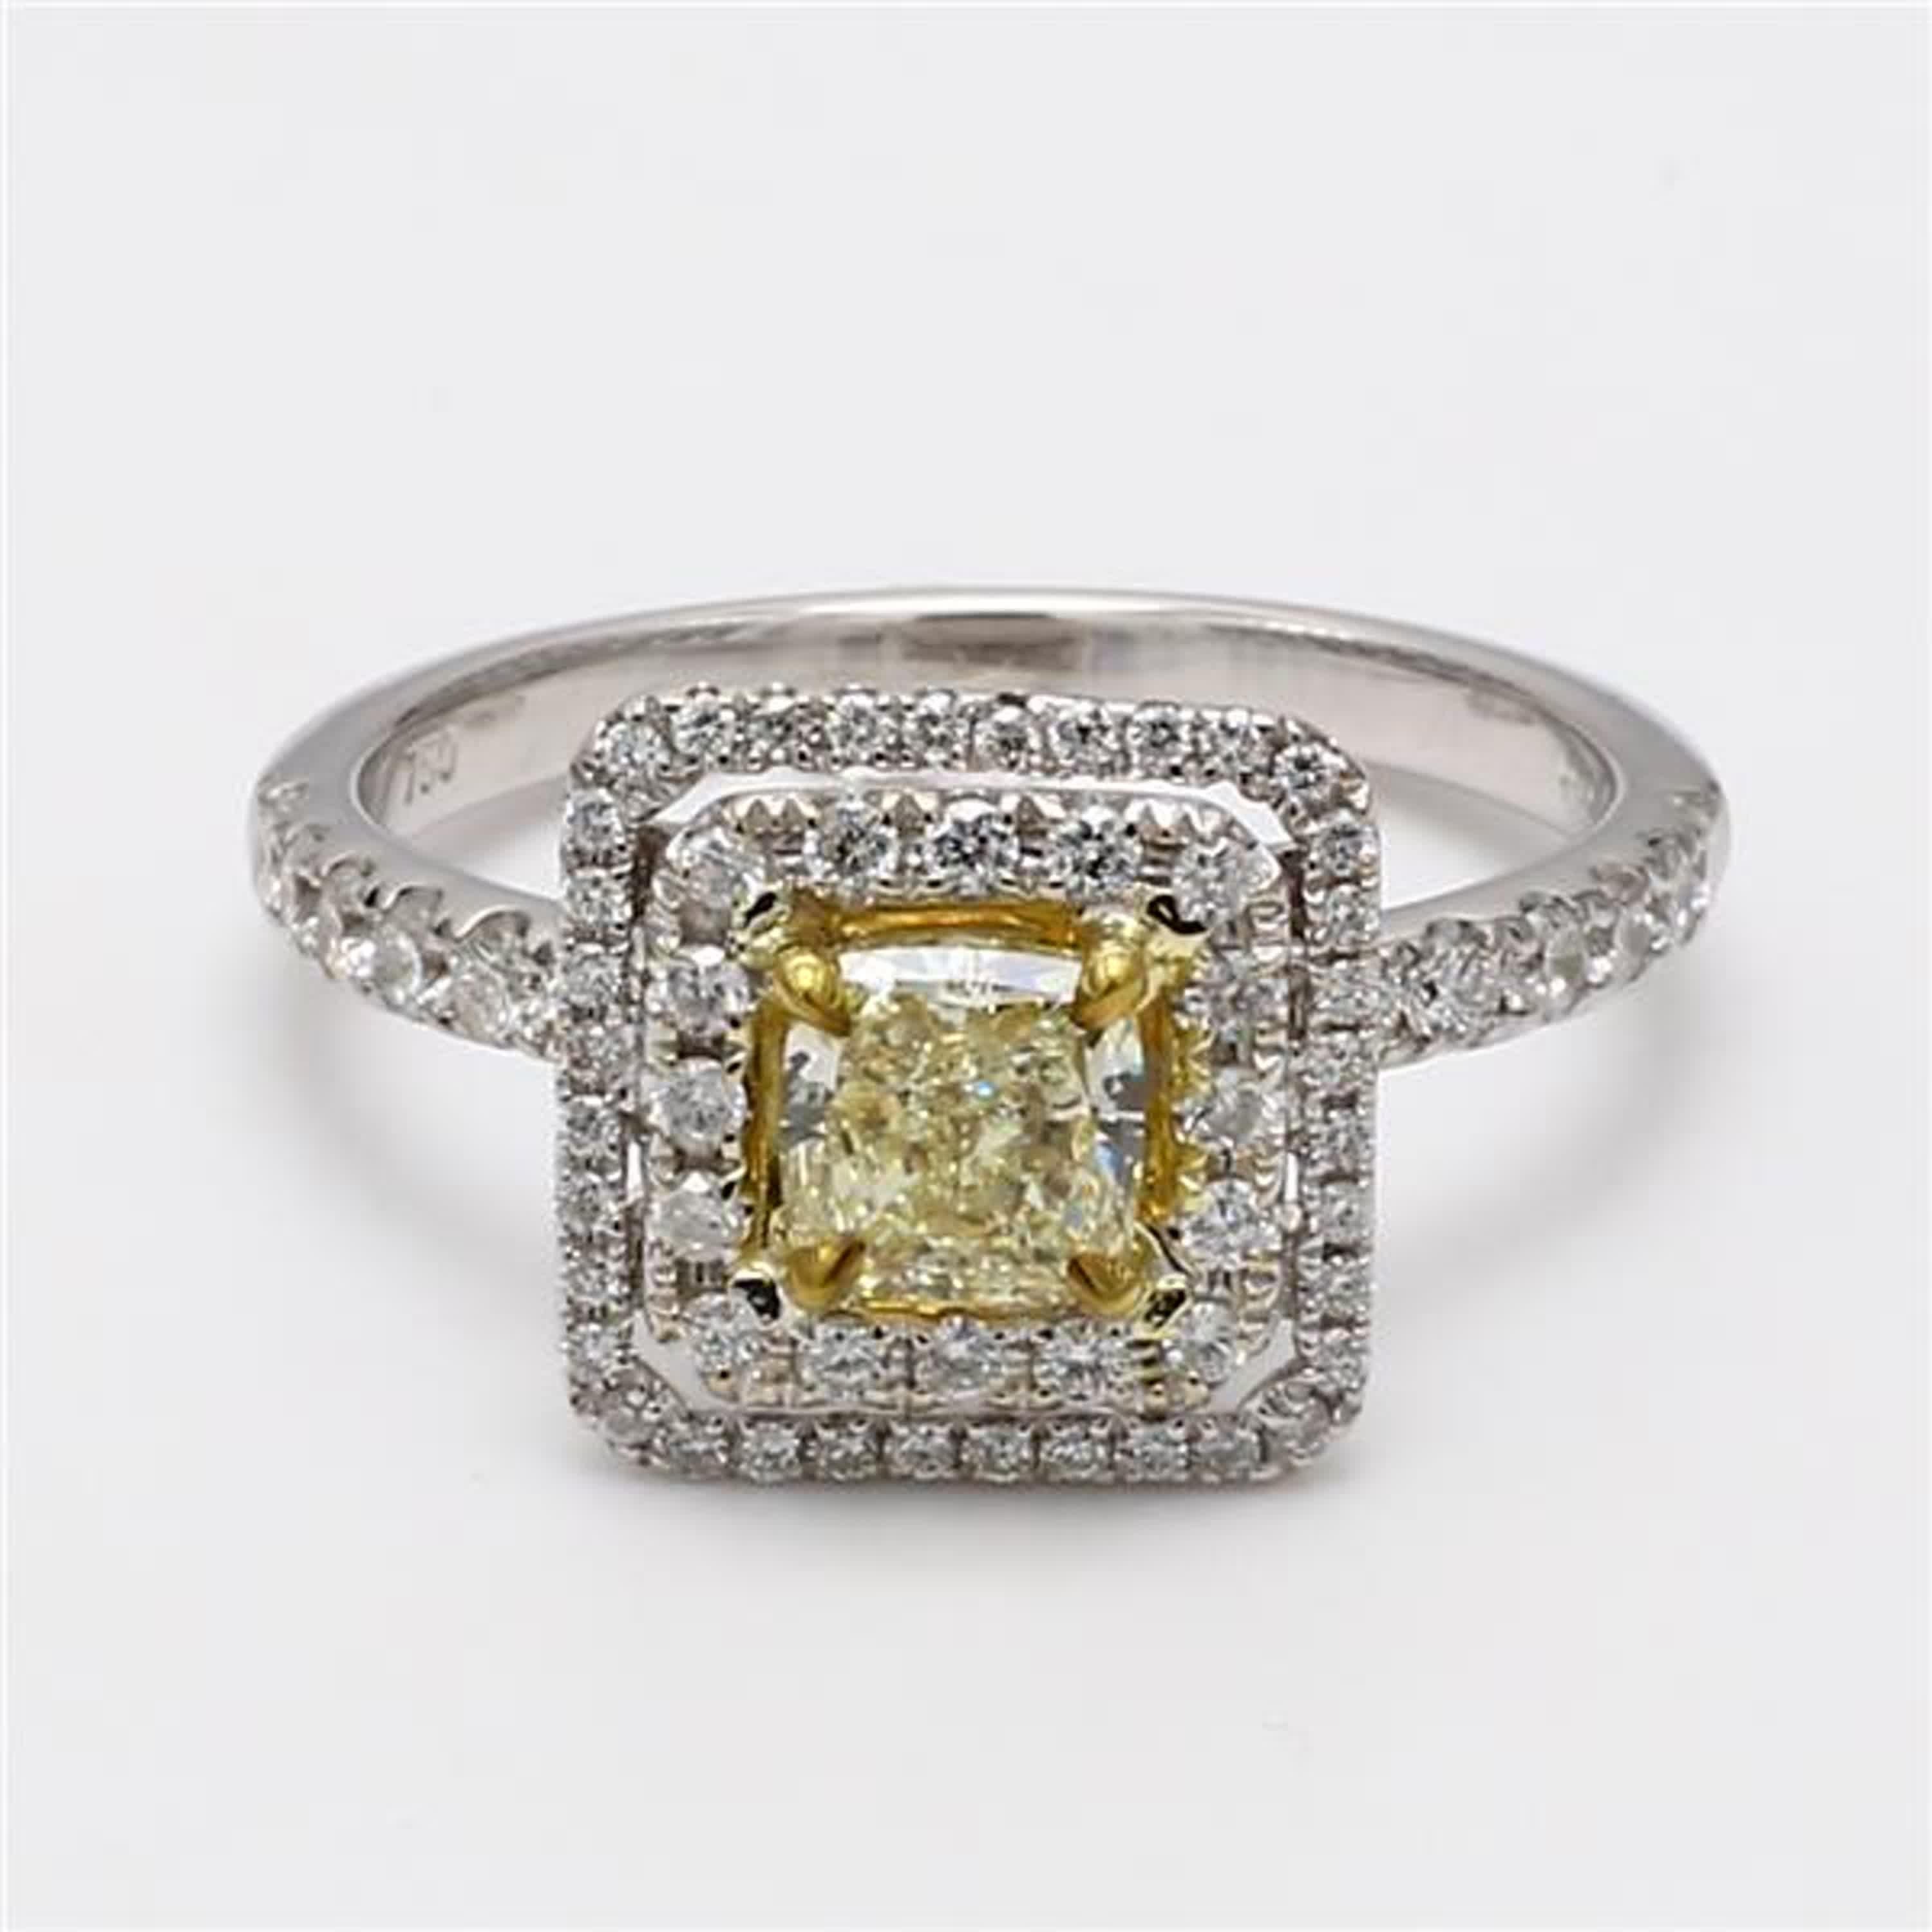 RareGemWorld's classic diamond ring. Mounted in a beautiful 18K Yellow and White Gold setting with a natural cushion cut yellow diamond. The yellow diamond is surrounded by round natural white diamond melee. This ring is guaranteed to impress and